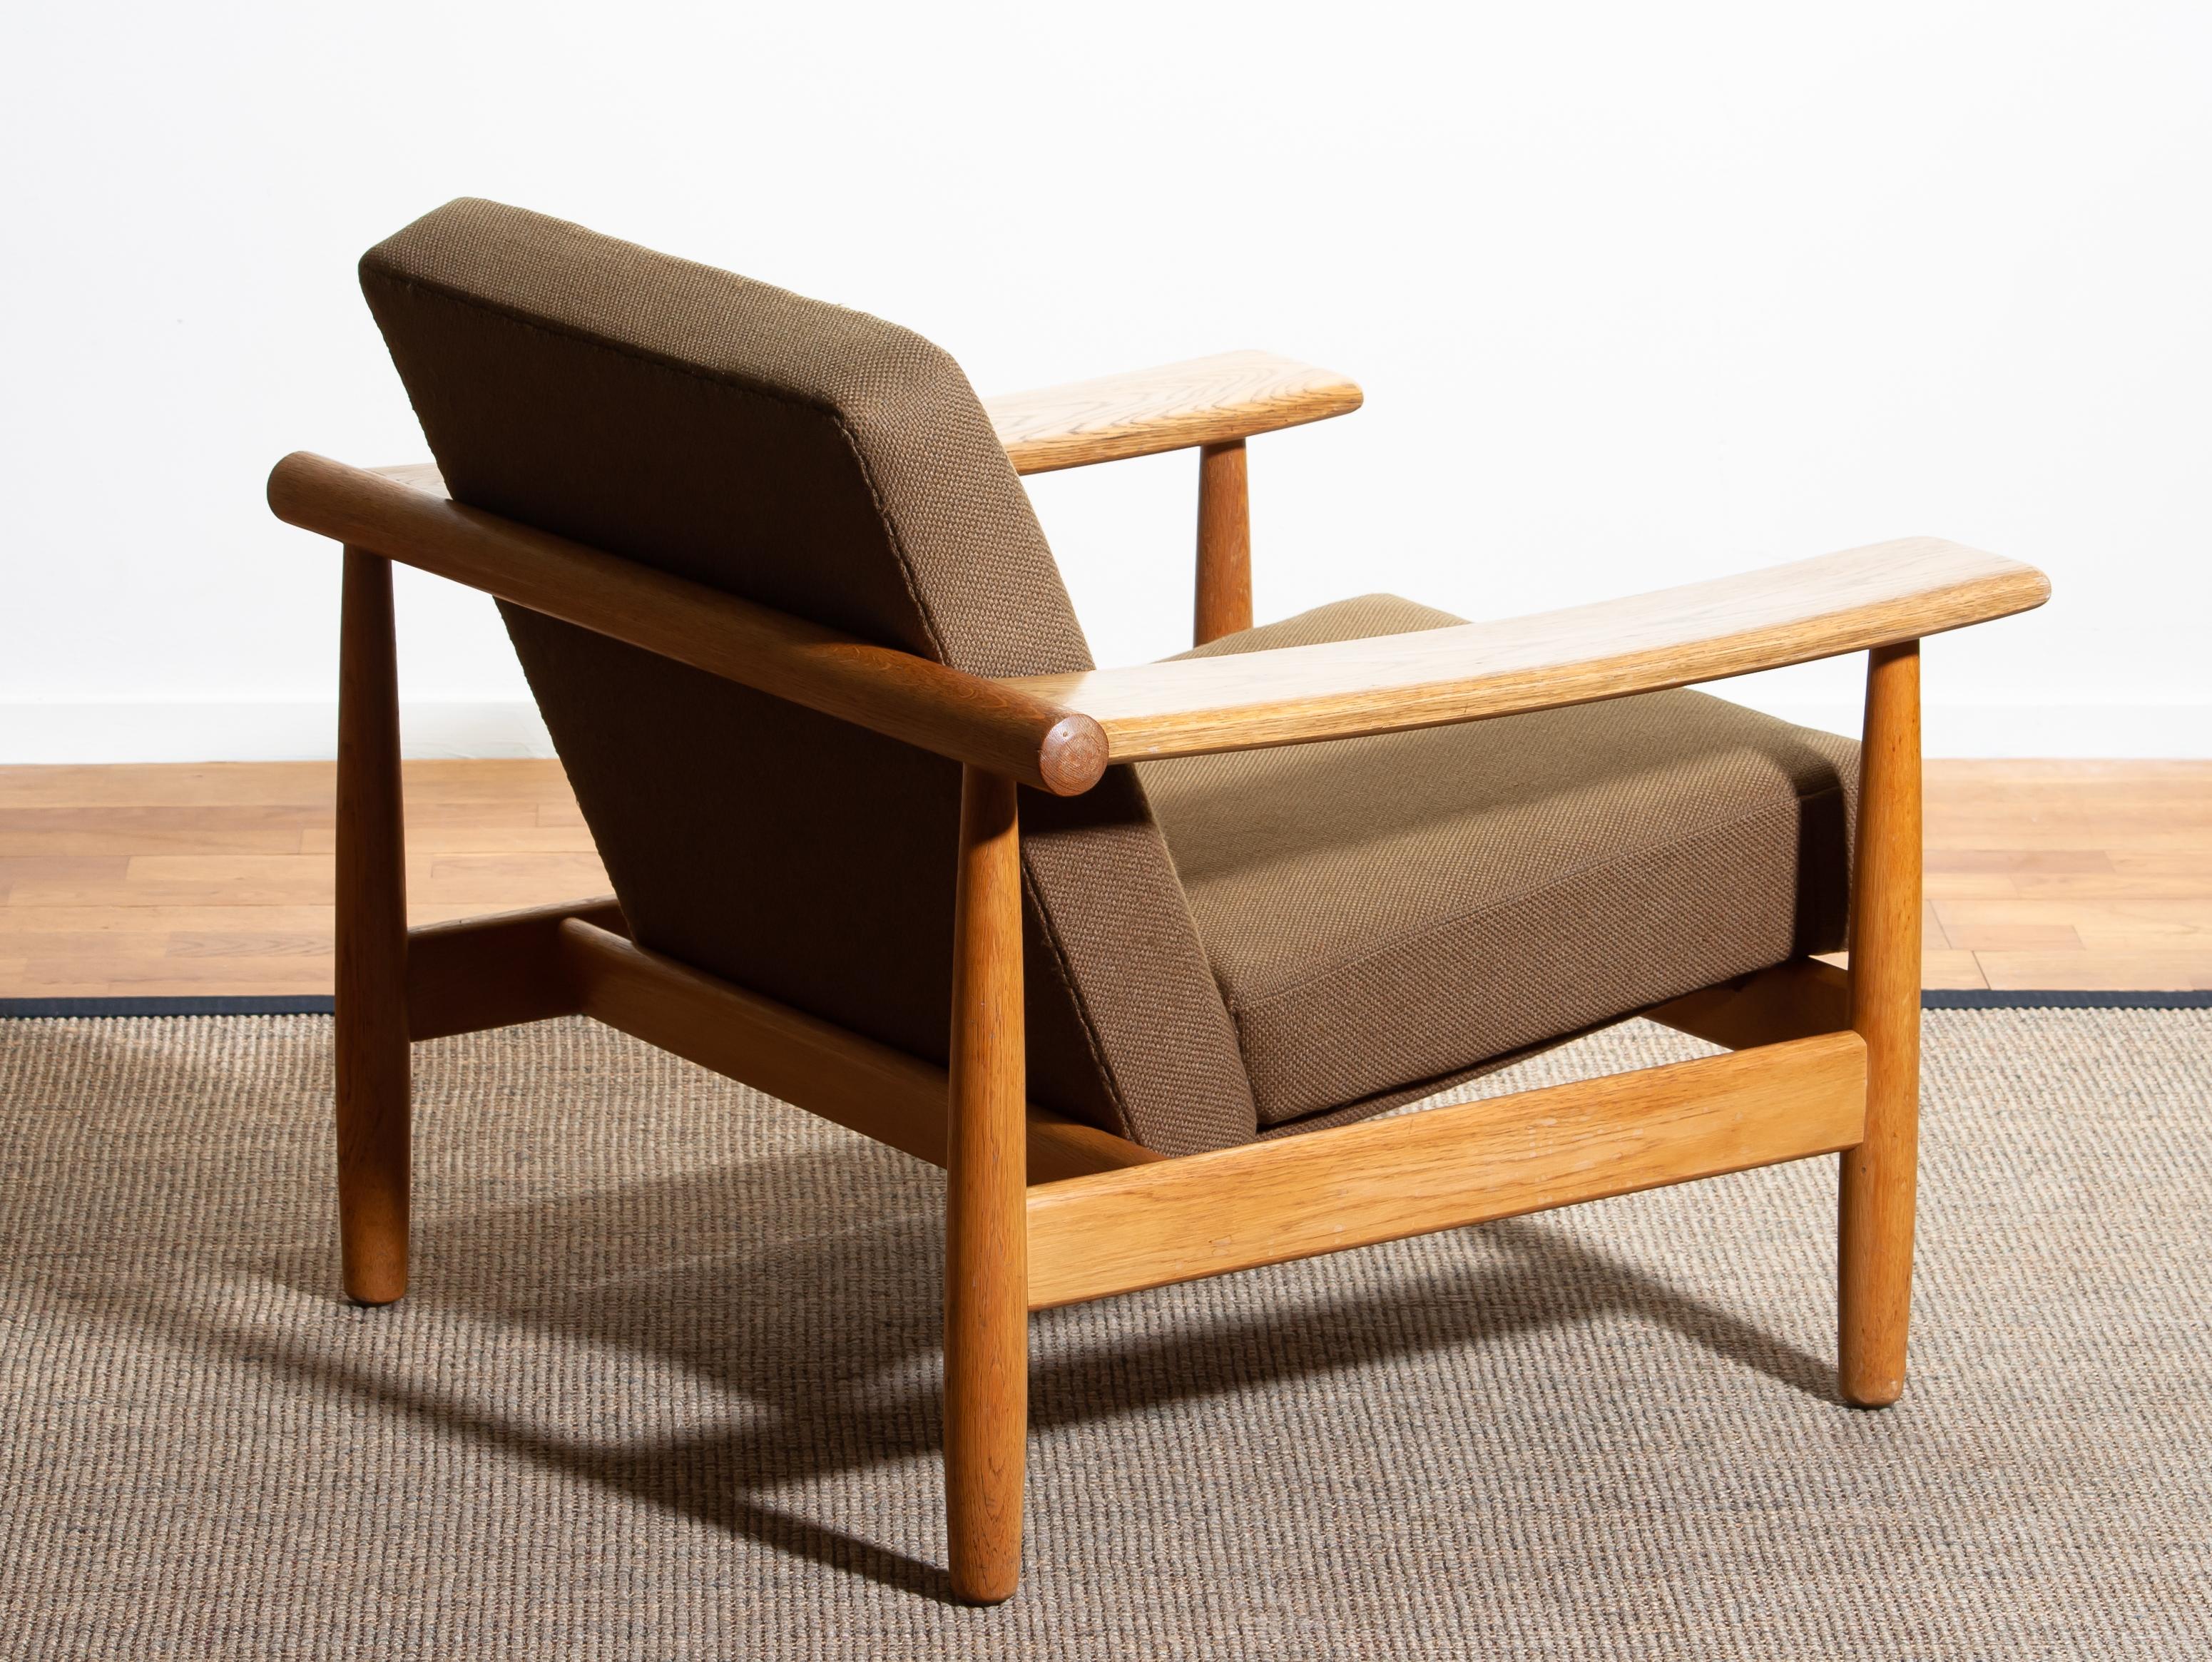 1960s, Oak Sofa and Lounge Chair / Livingroom Set from Denmark in GETAMA Style 1